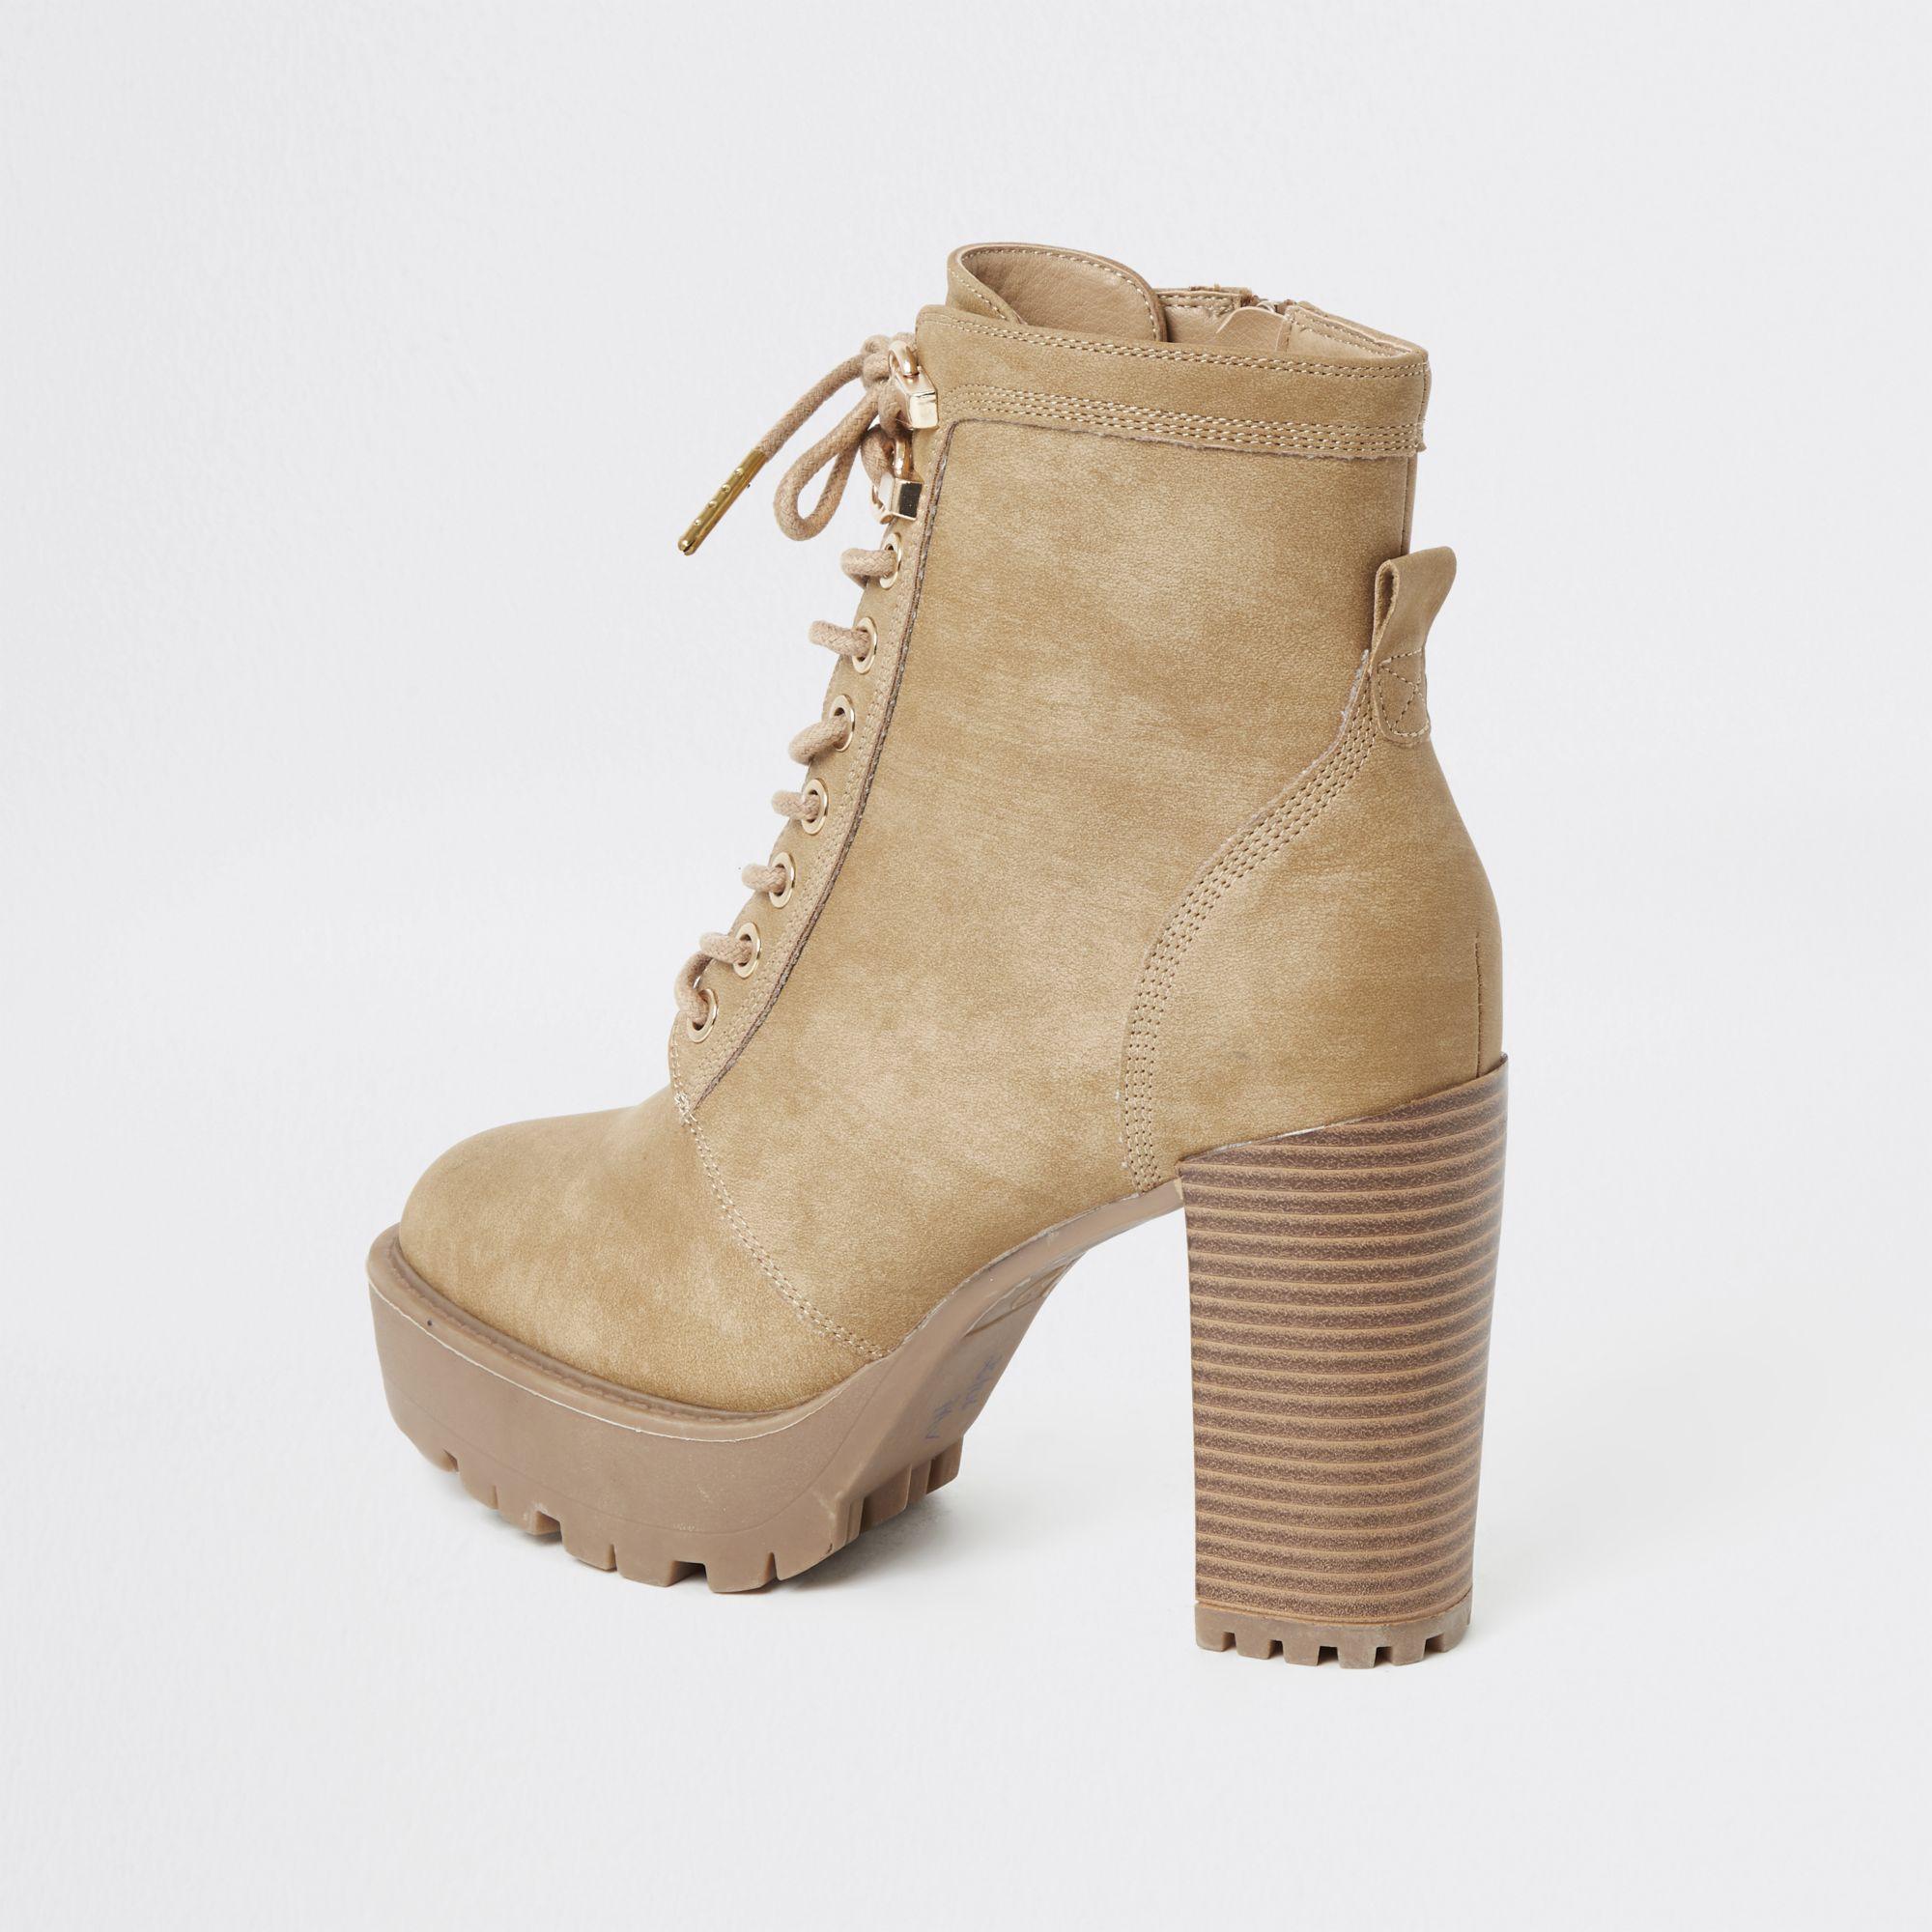 River Island Lace-up Chunky High Heel Hiker Boots in Natural | Lyst UK